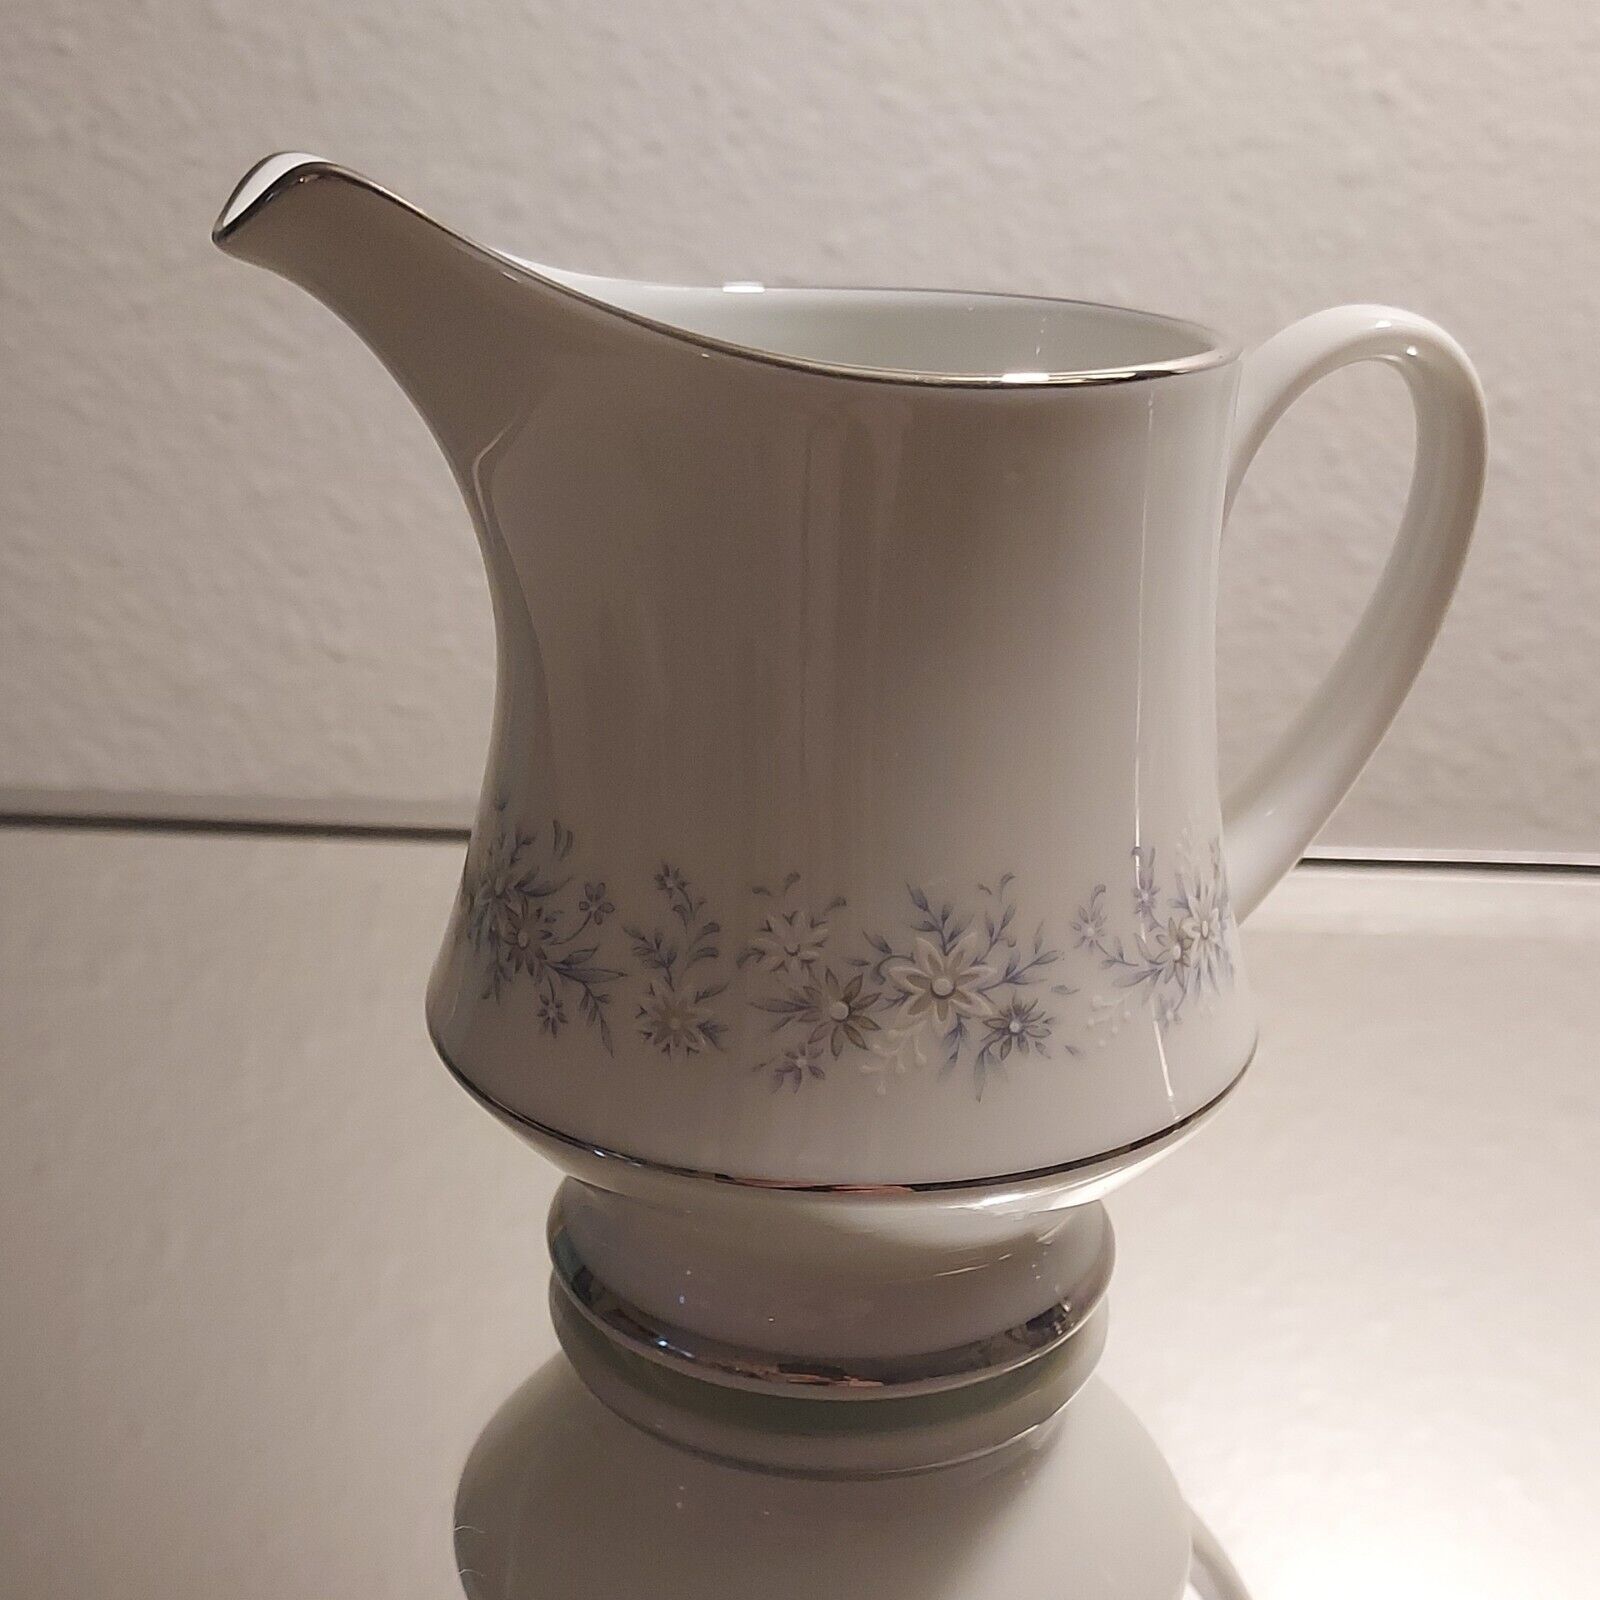  Creamer Contemporary by NORITAKE MARYWOOD 2181 Fine China Made in Japan 